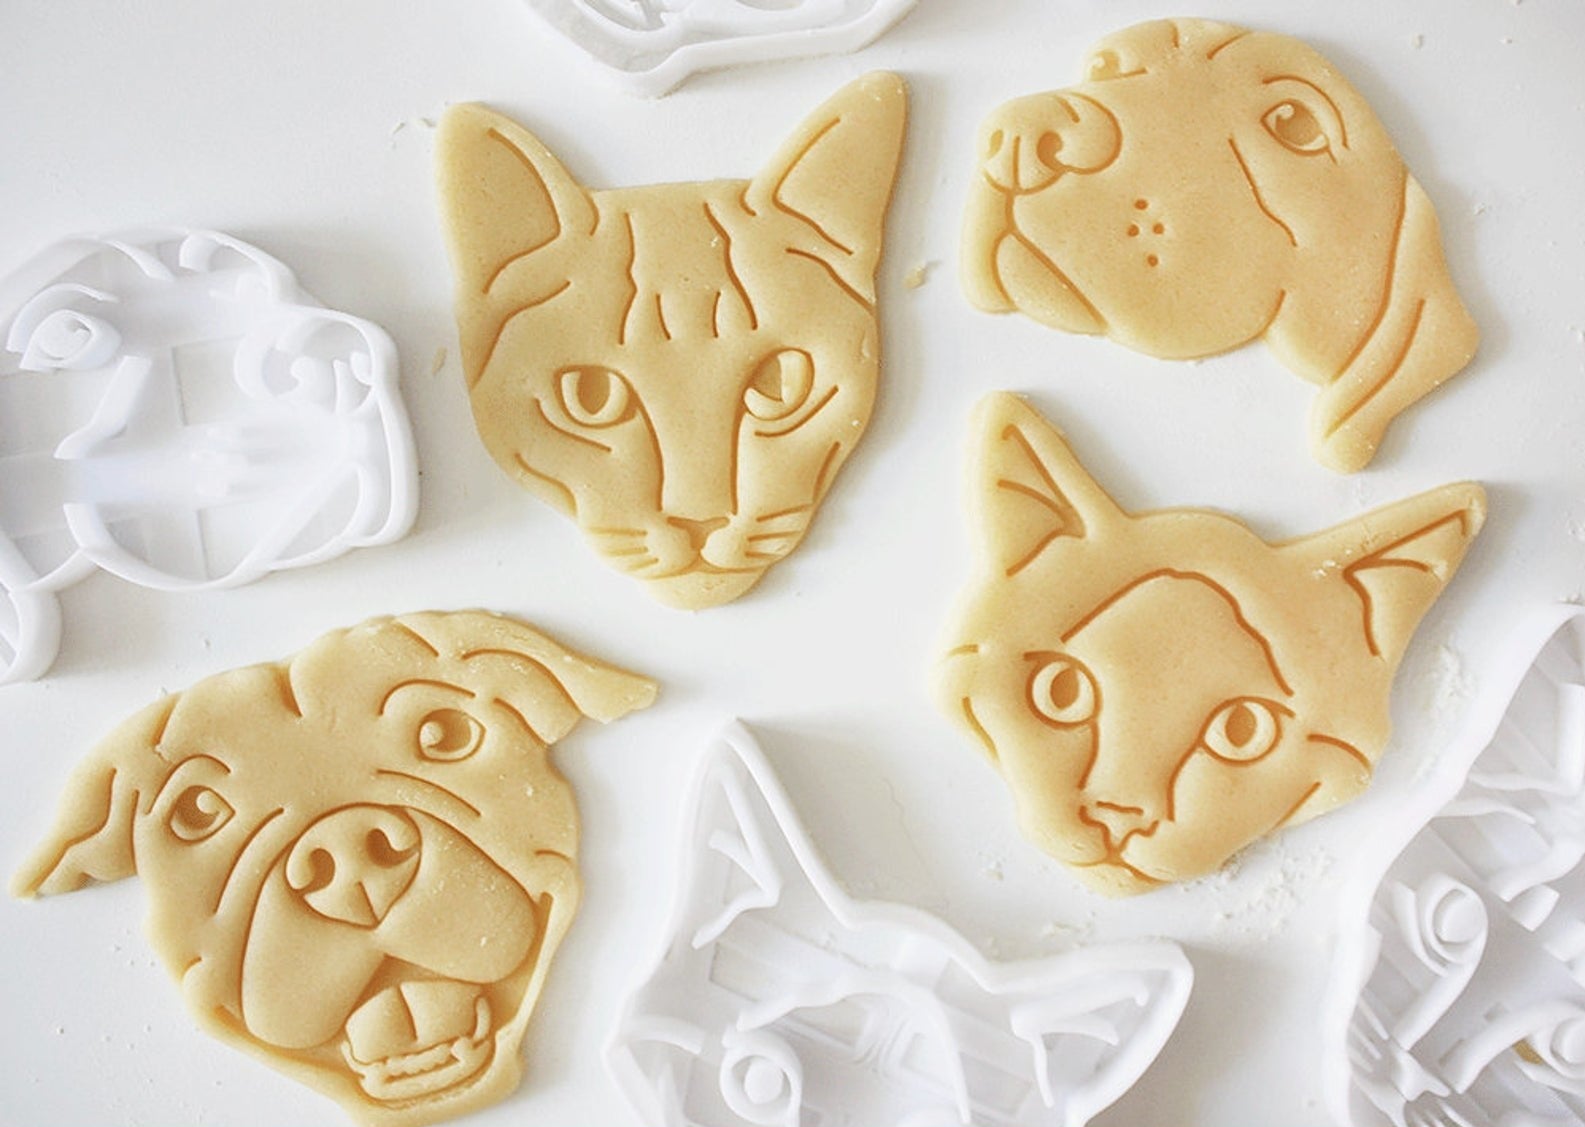 Some pet-shaped cookies next to their cookie cutters